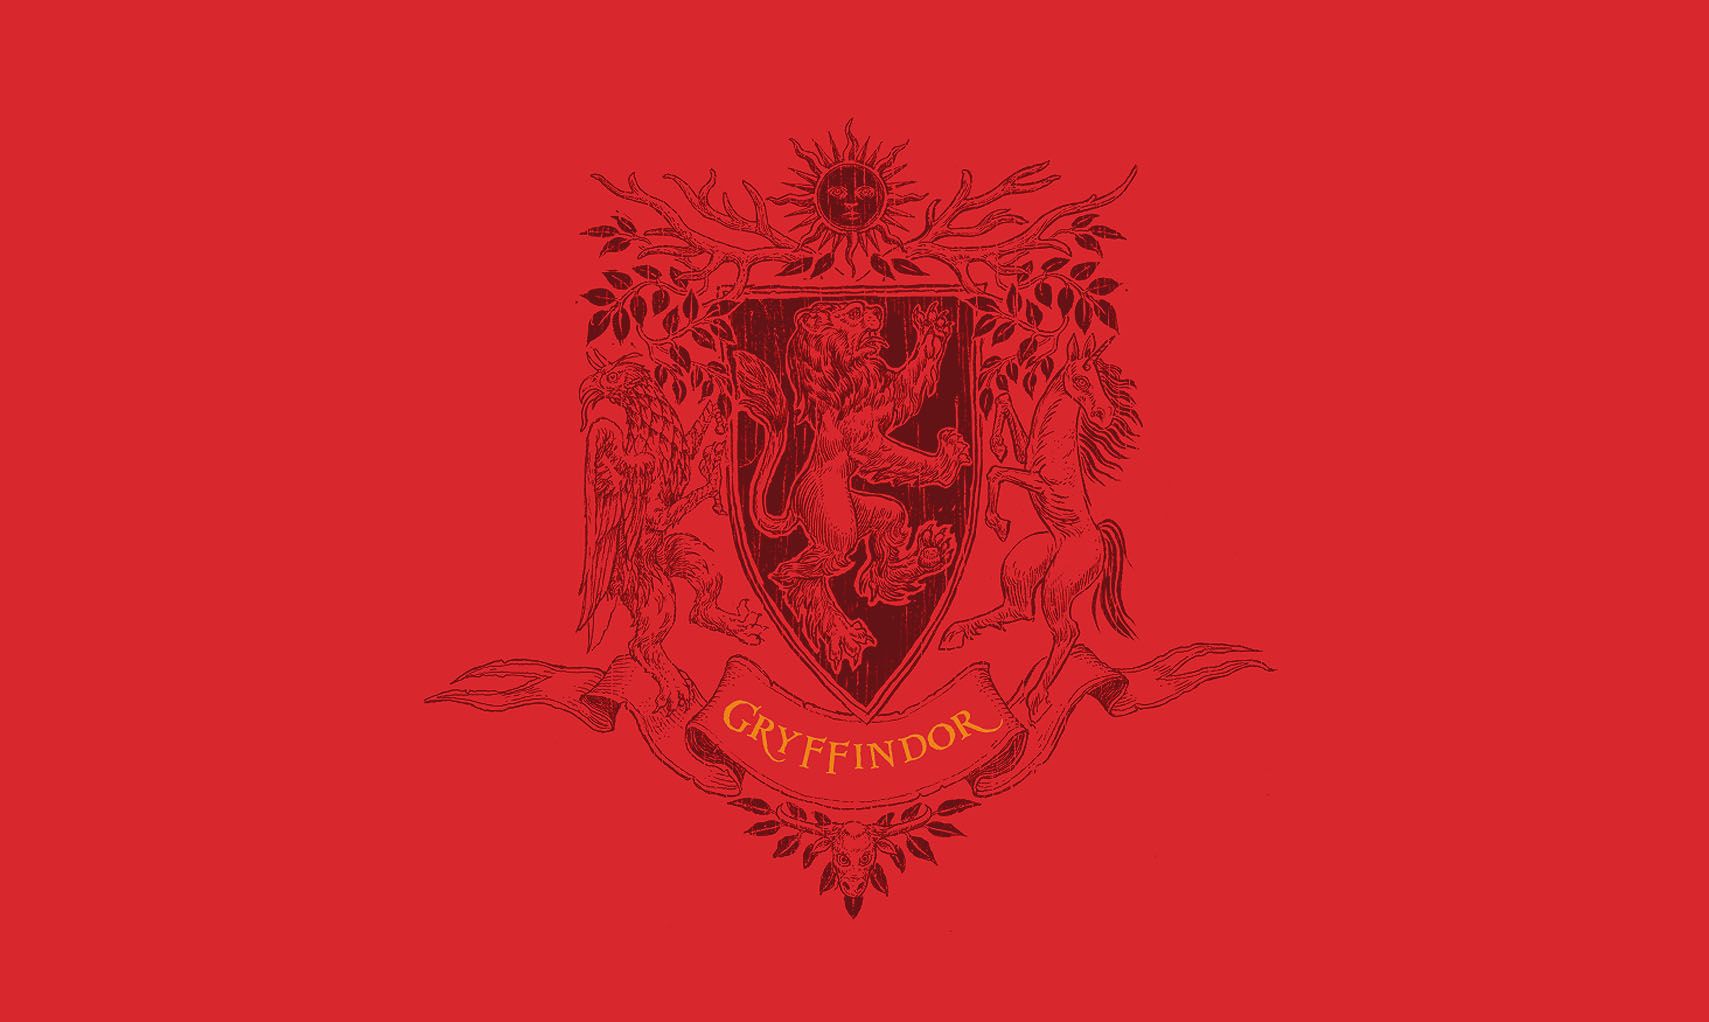 Hogwarts house themed covers unveiled for Philosopher's Stone's 20th anniversary